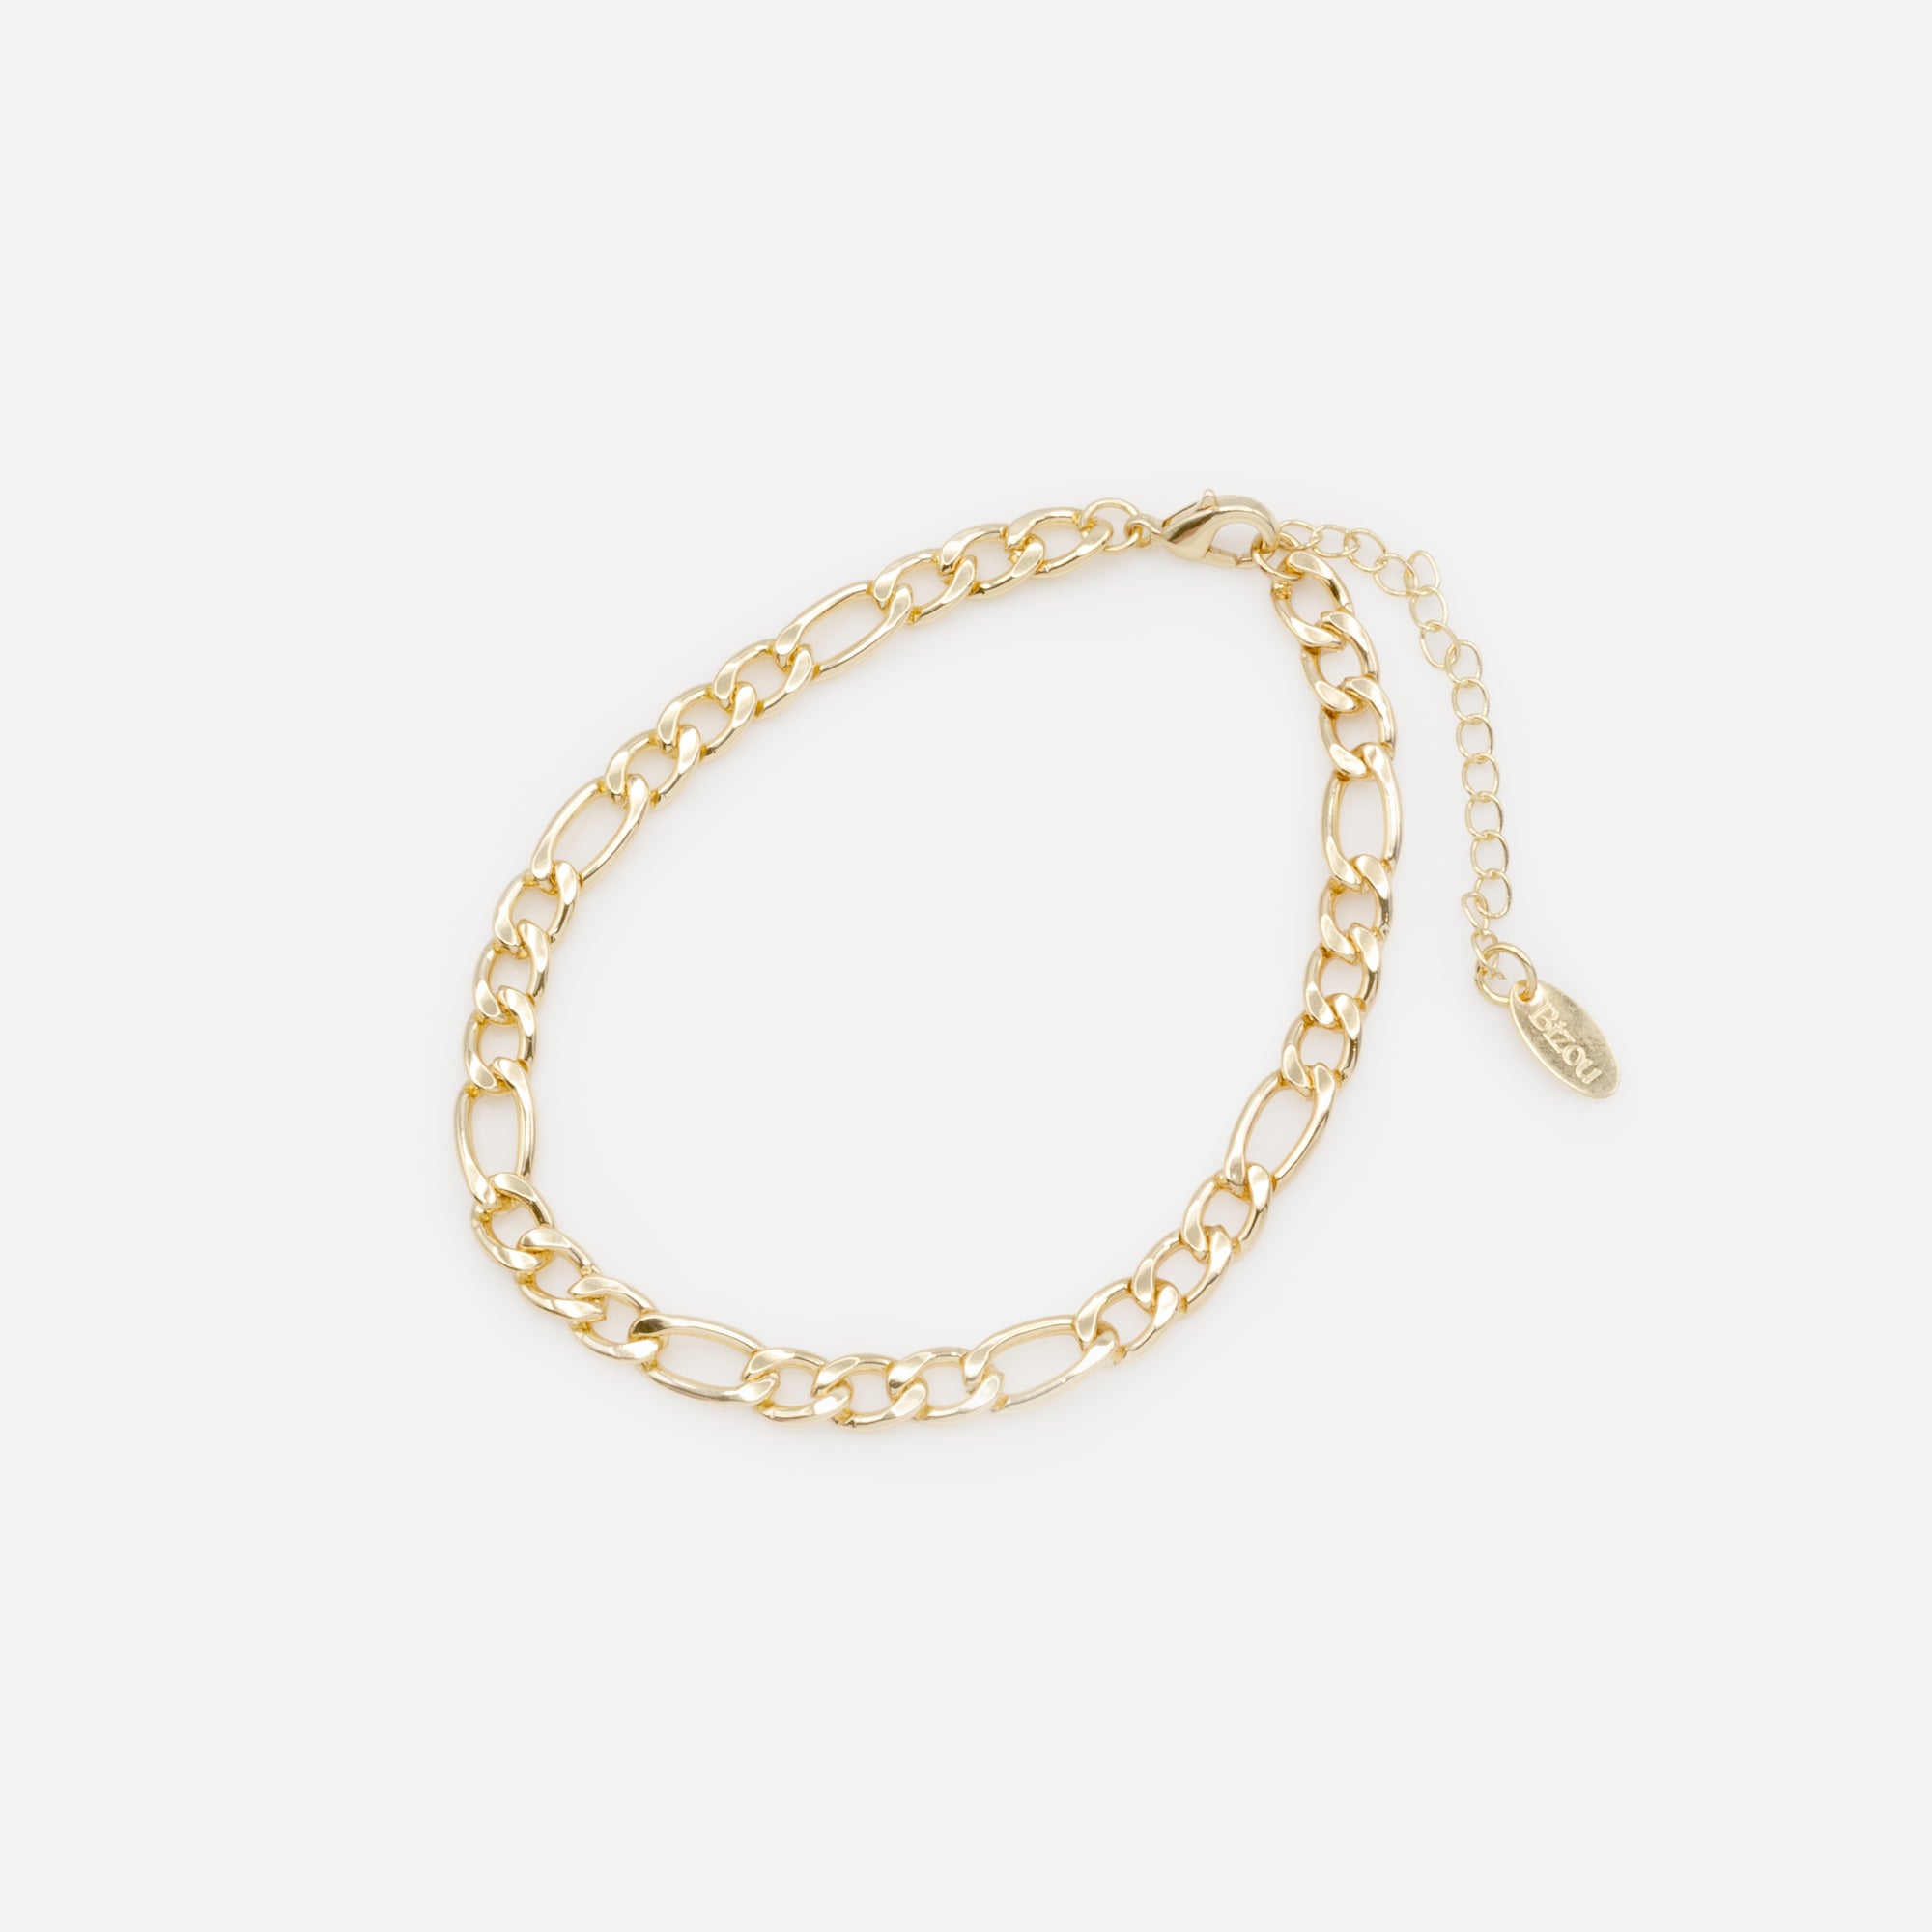 Set of four gold anklets with white butterflies